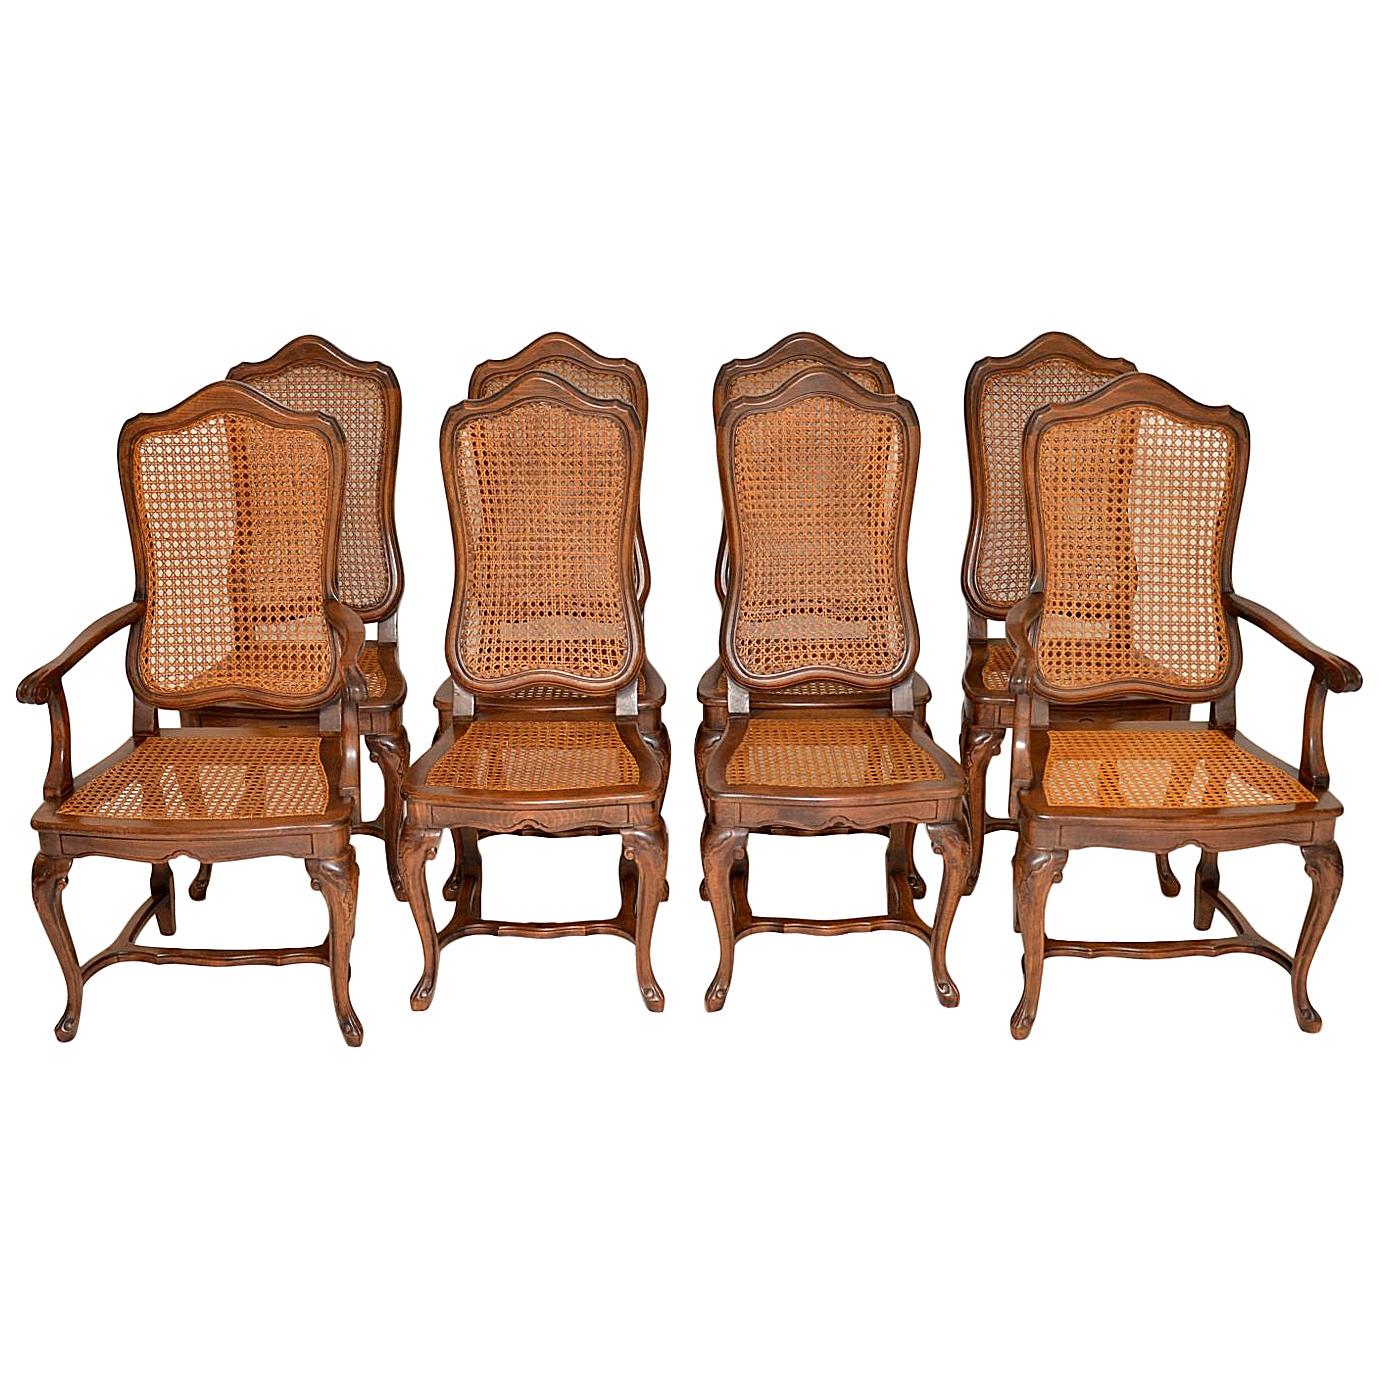 Set of 8 Antique French Provincial Dining Chairs